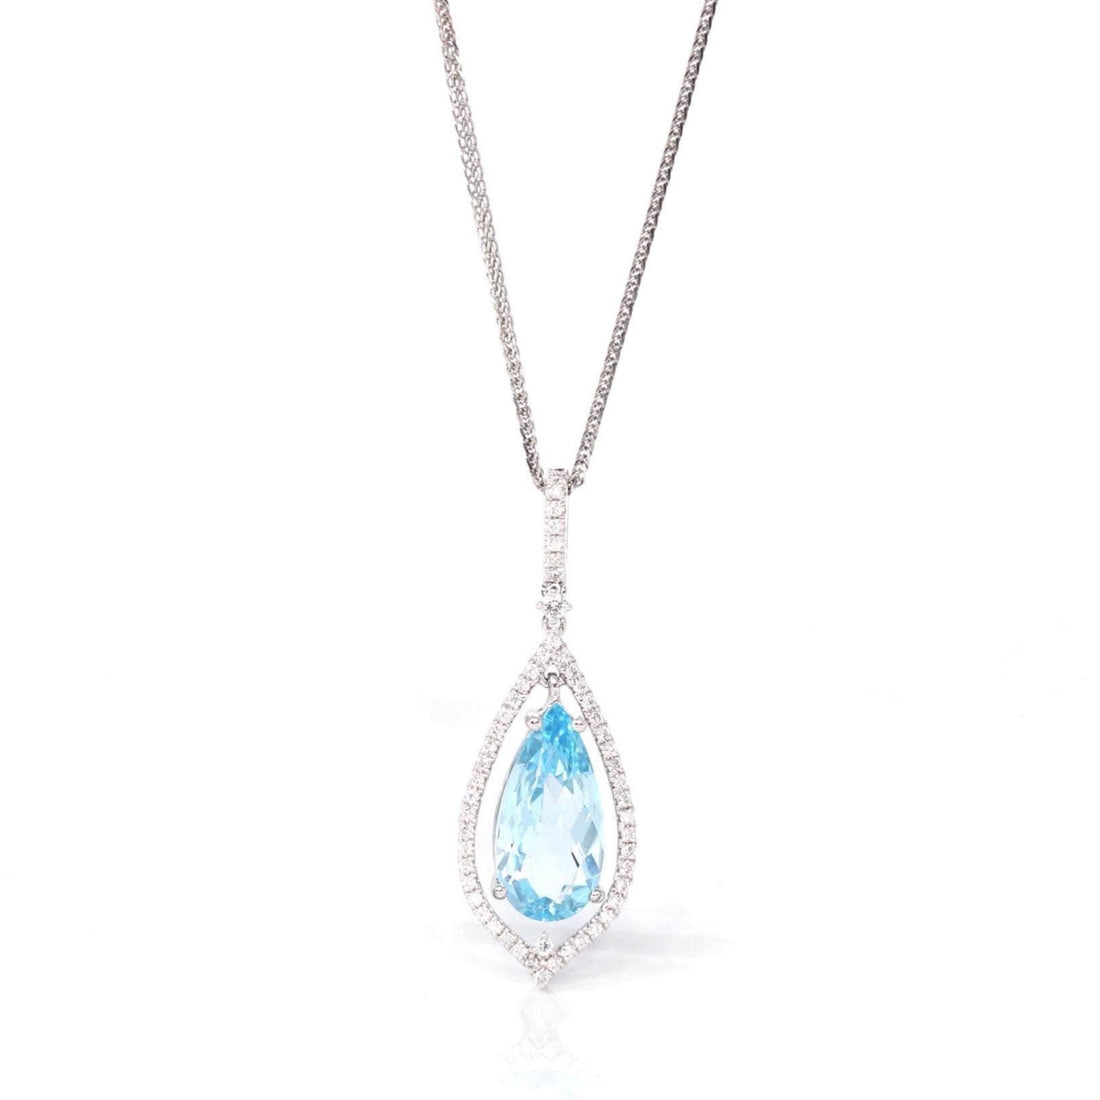 Baikalla Jewelry Gemstone Pendant Necklace Pendant Only 14k White Gold Natural Swiss Blue Topaz Tear Drop Necklace With Diamonds